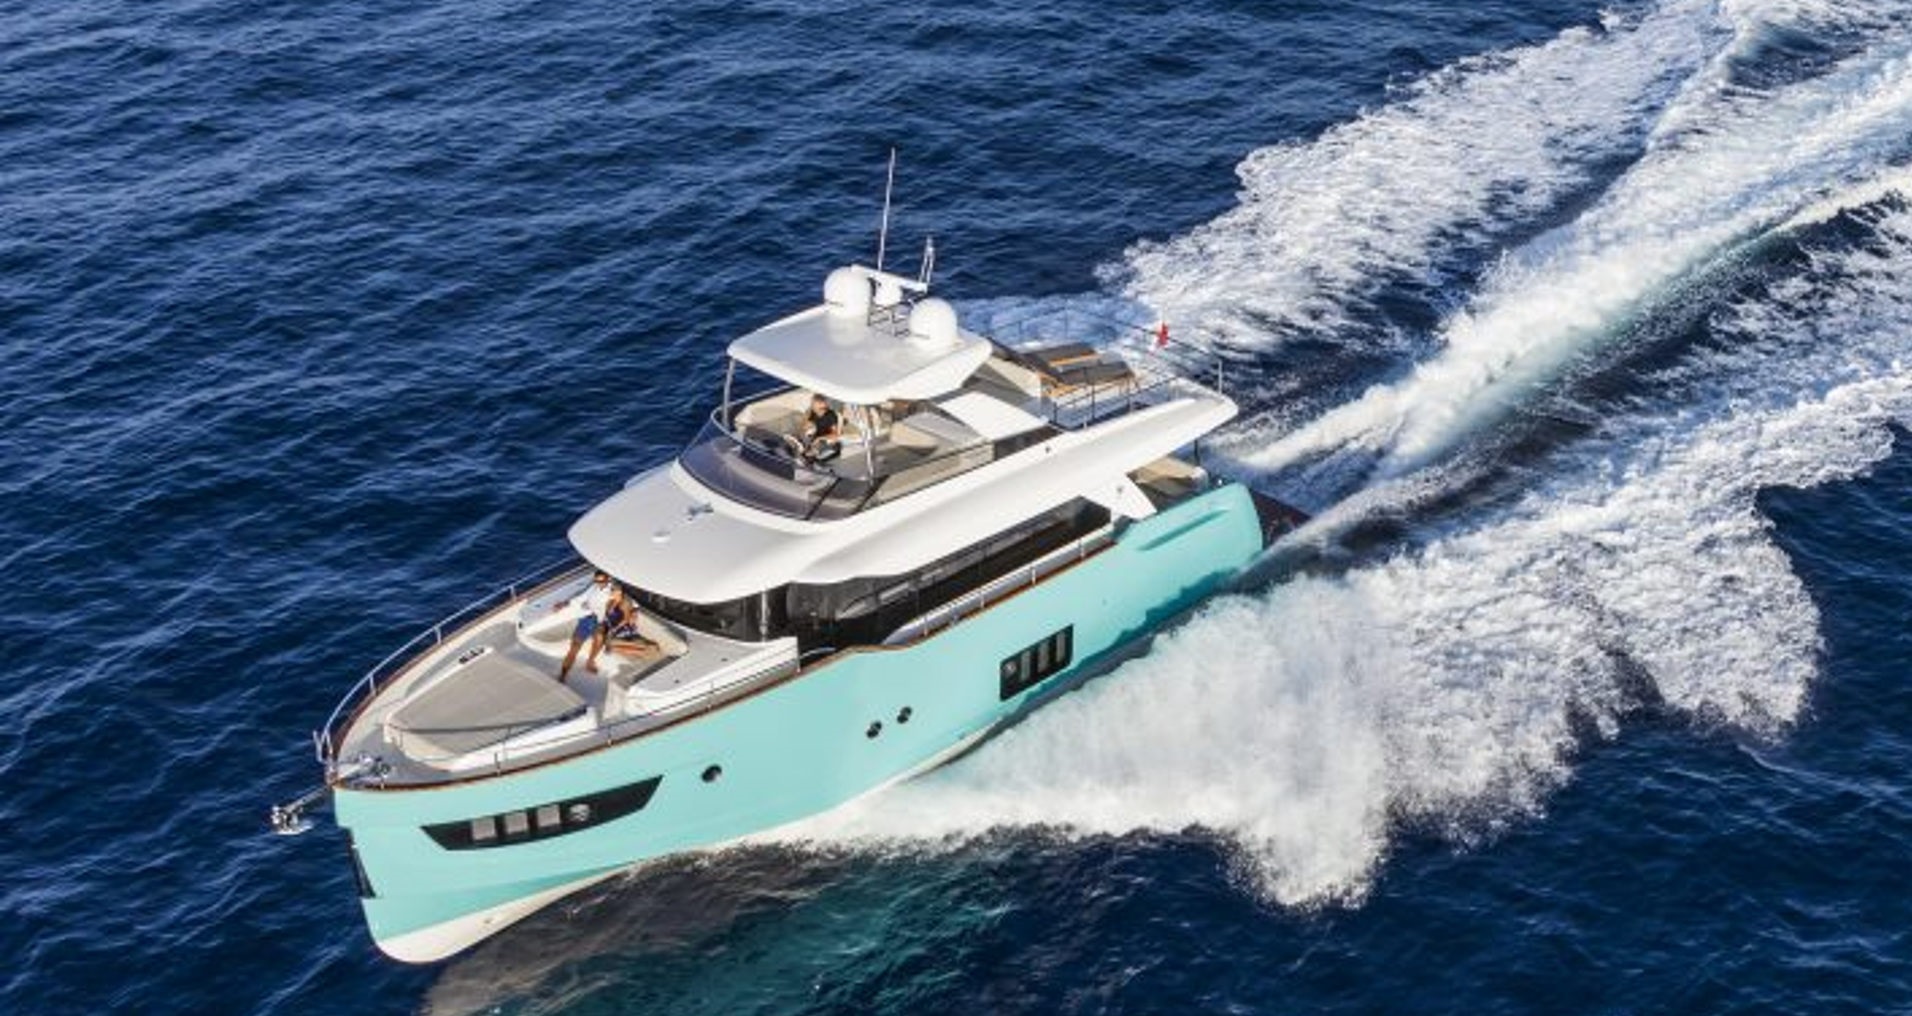 Motor Yacht Absolute Navetta for sale Yachtzoo